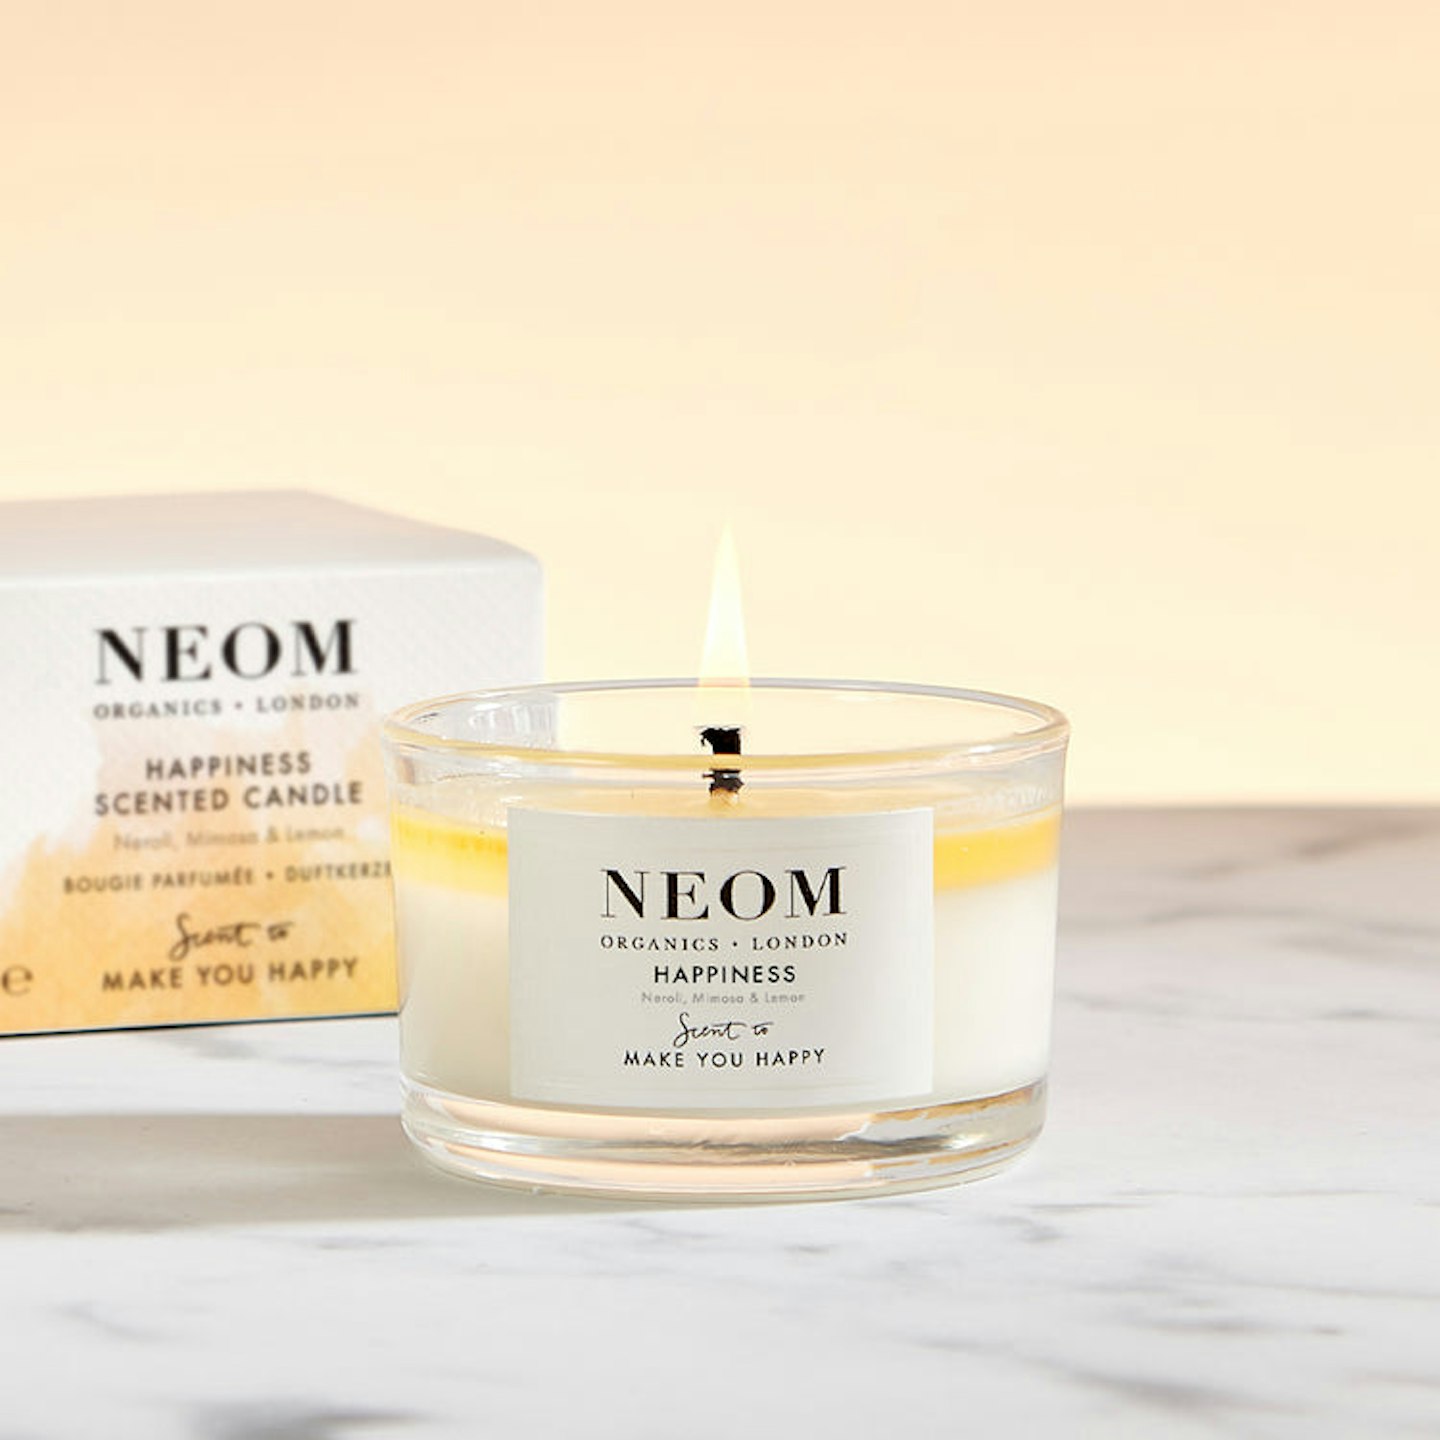 Neom, Happiness Scented Candle, £18